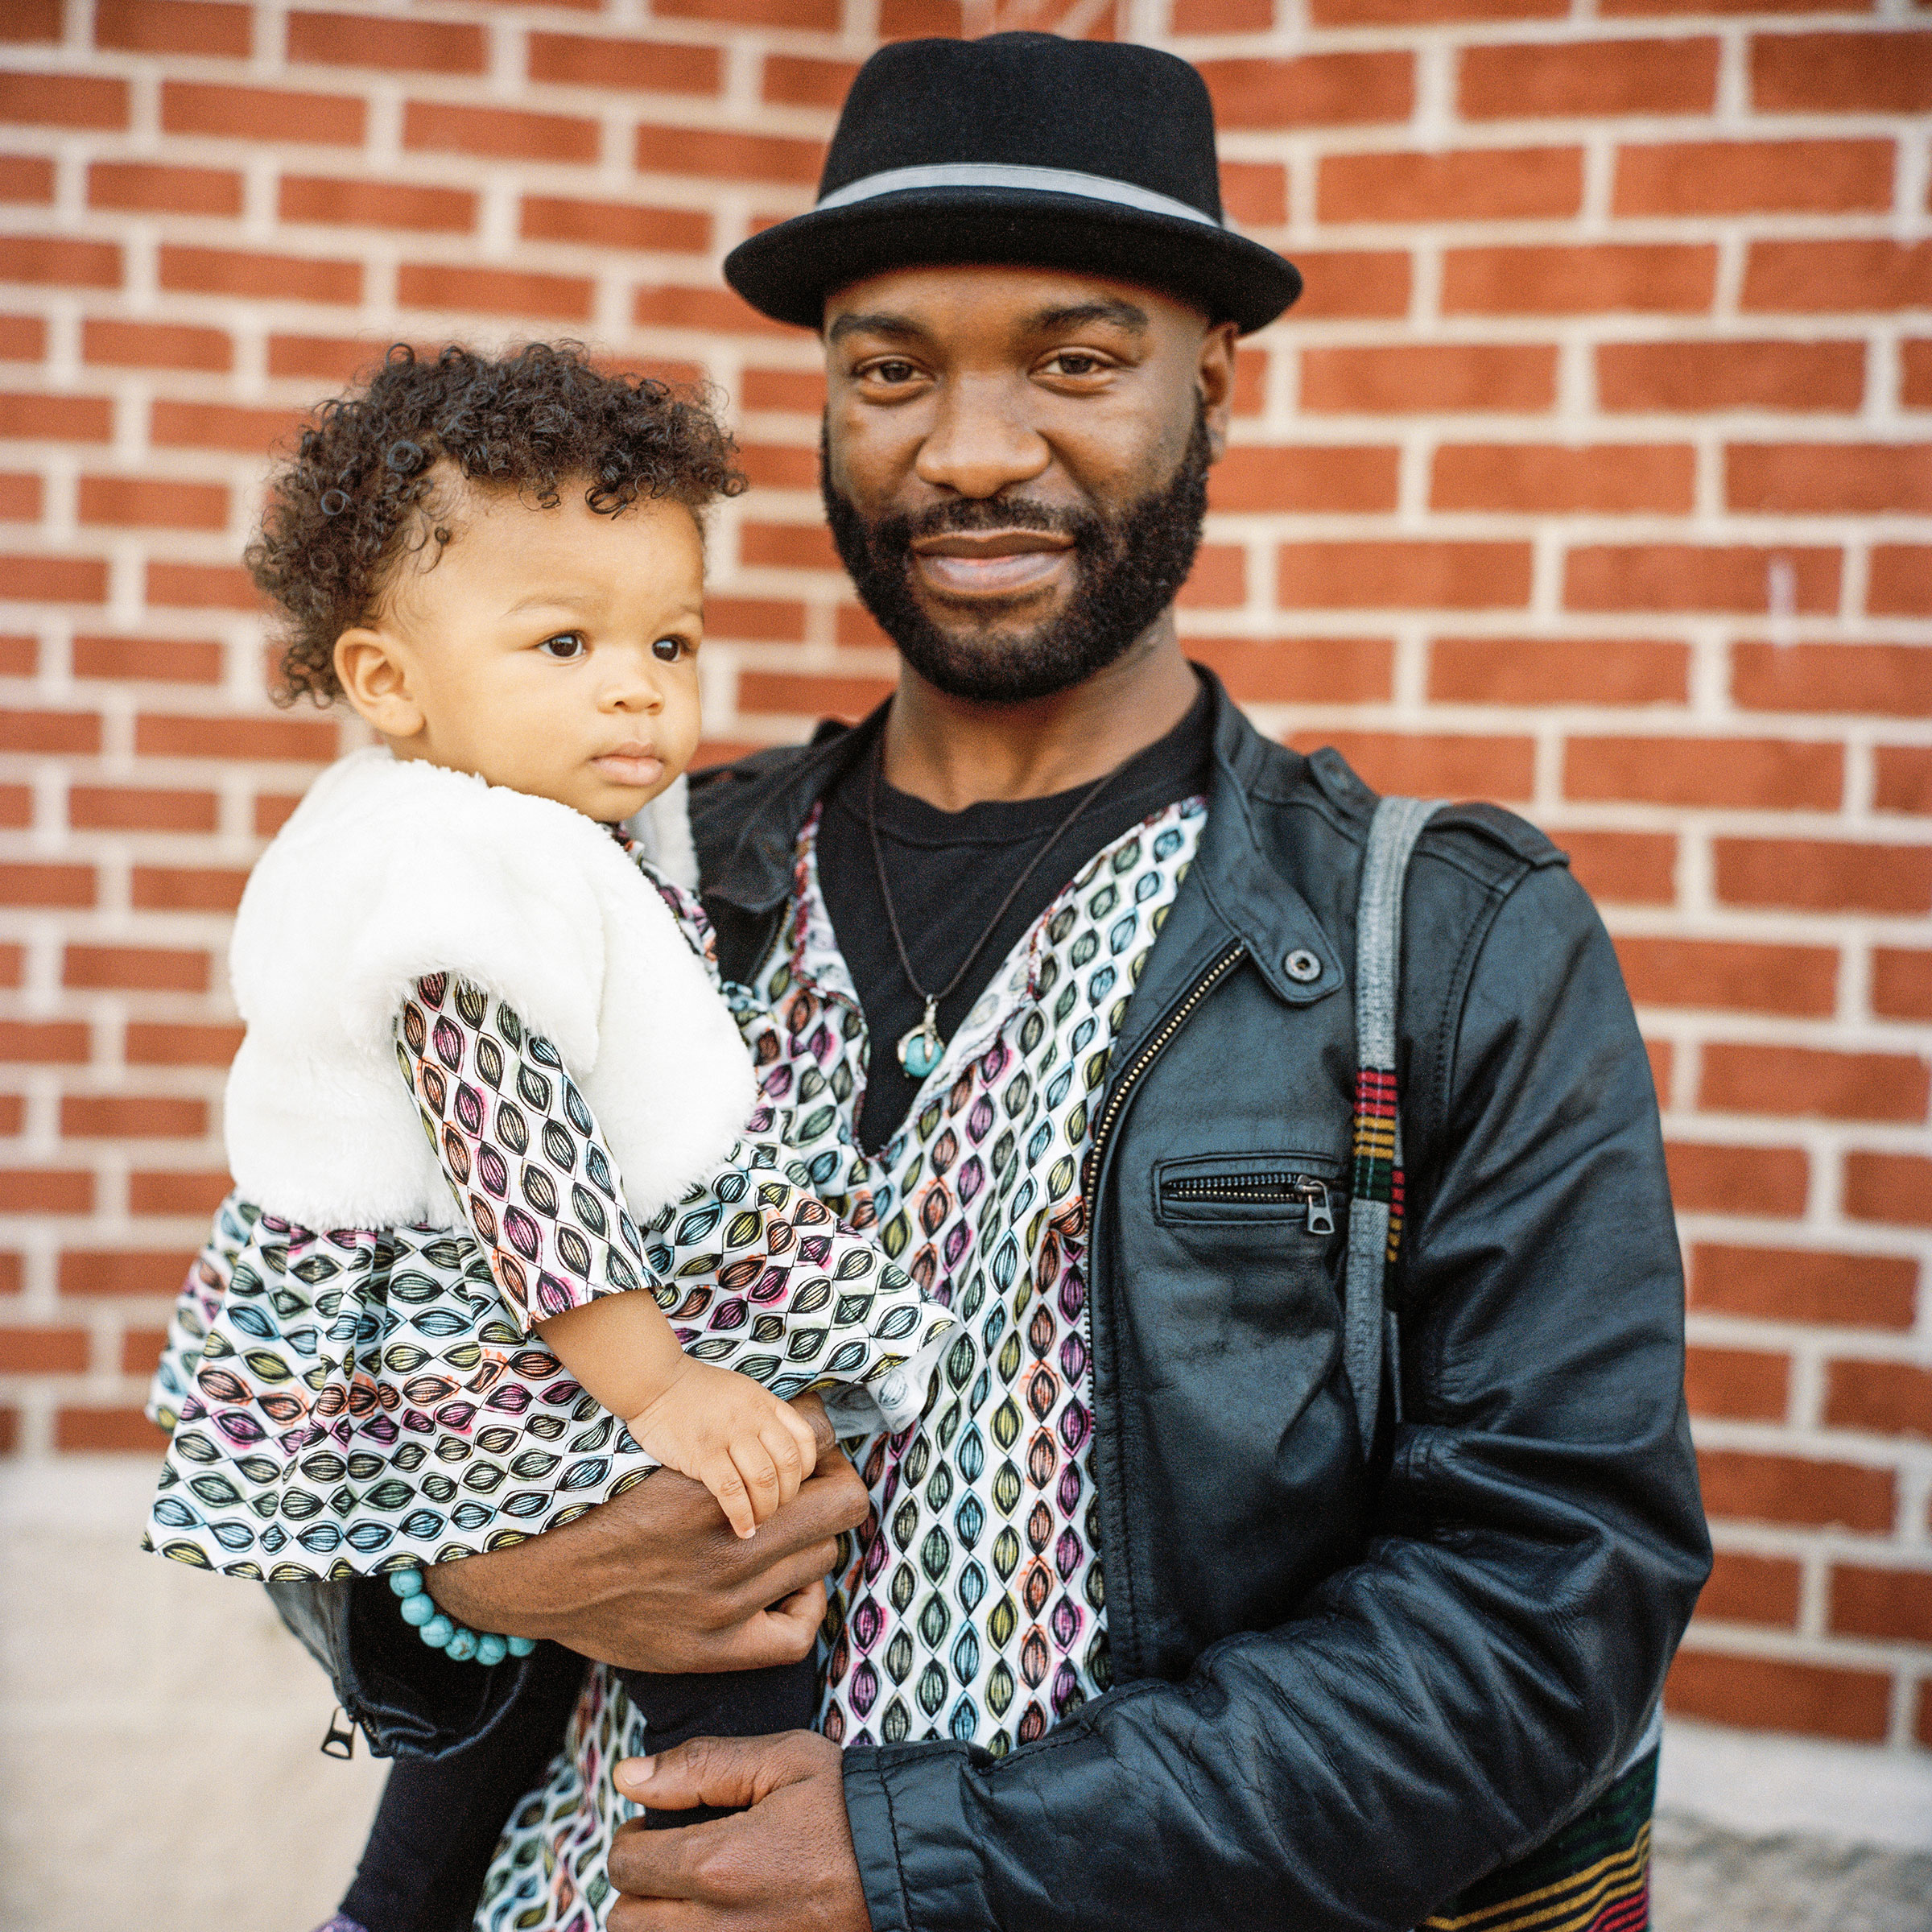 Mala and her father, Akere, at the “Date with Dad” dance, Richmond, VA 2015